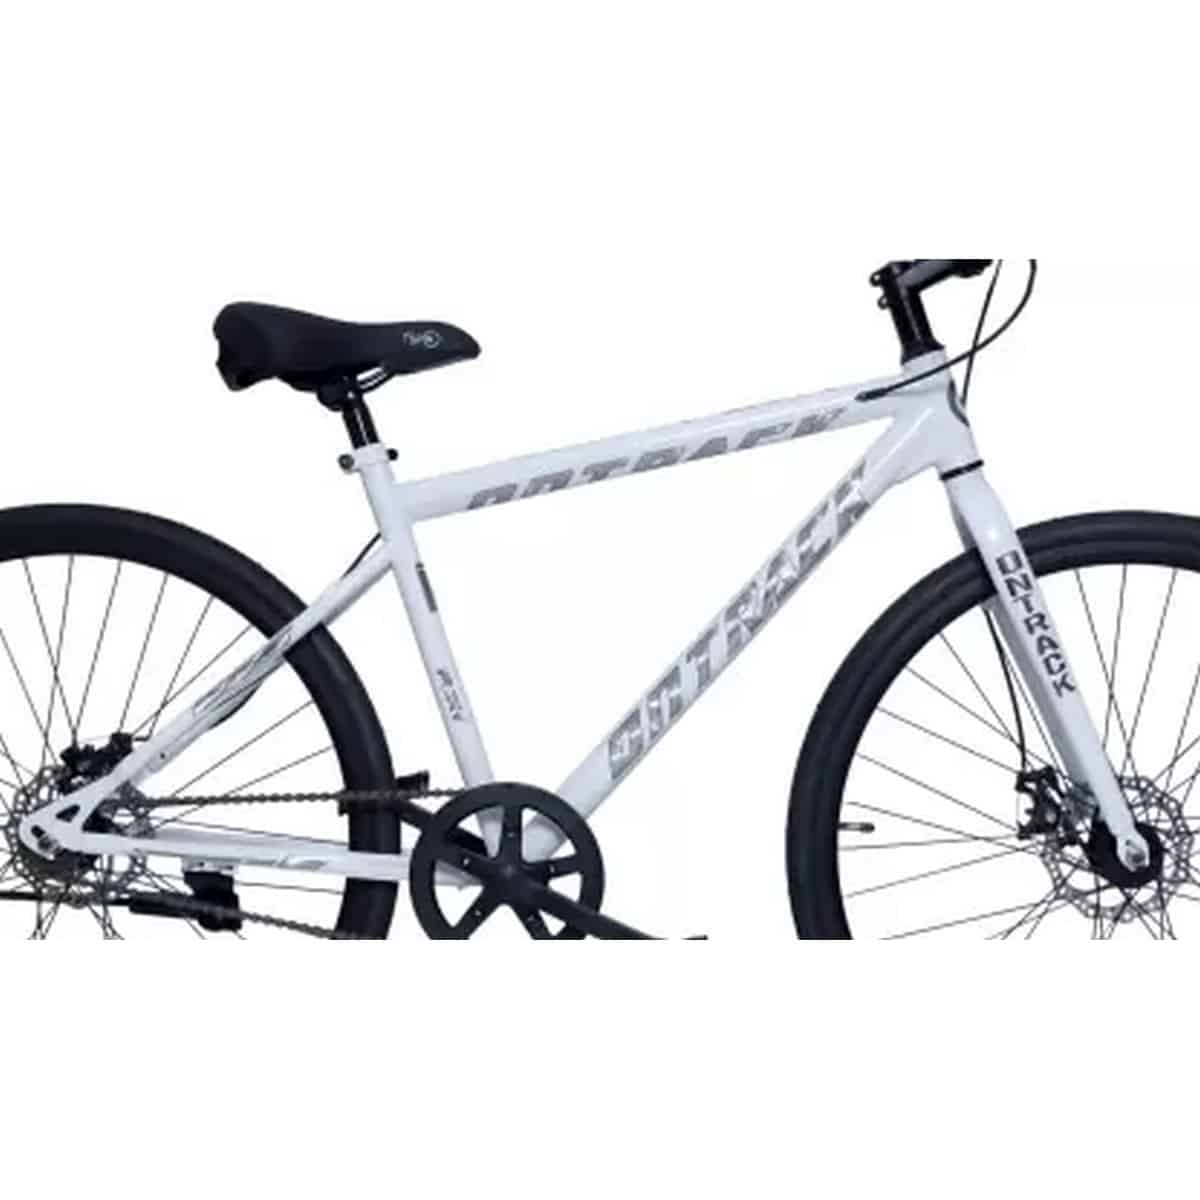 Ontrack Fury 700c White 700c T Road Cycle (Single Speed, White) (1)